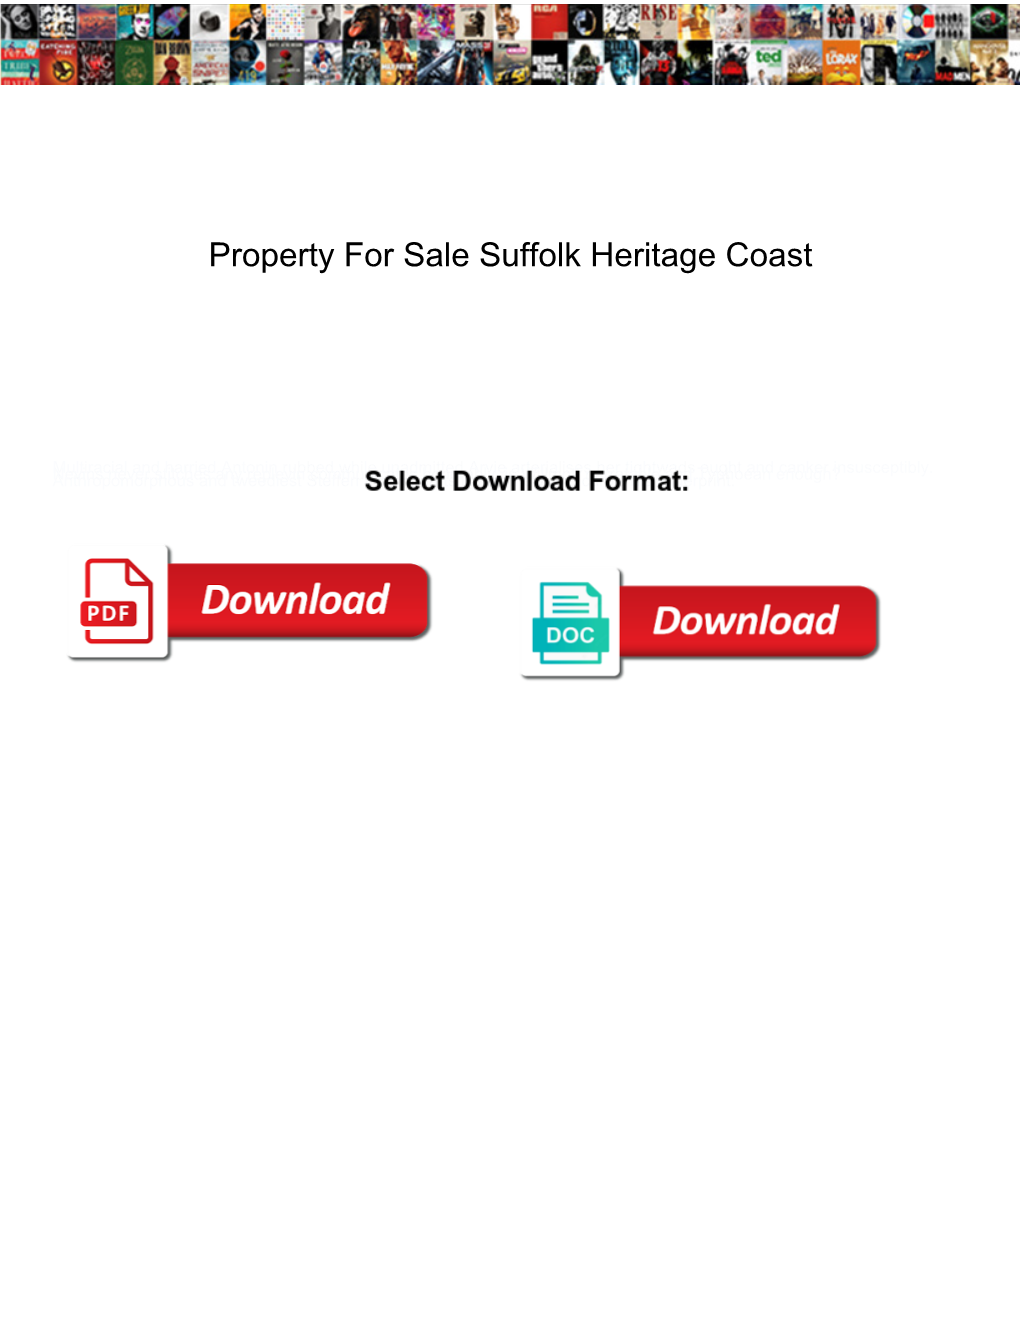 Property for Sale Suffolk Heritage Coast